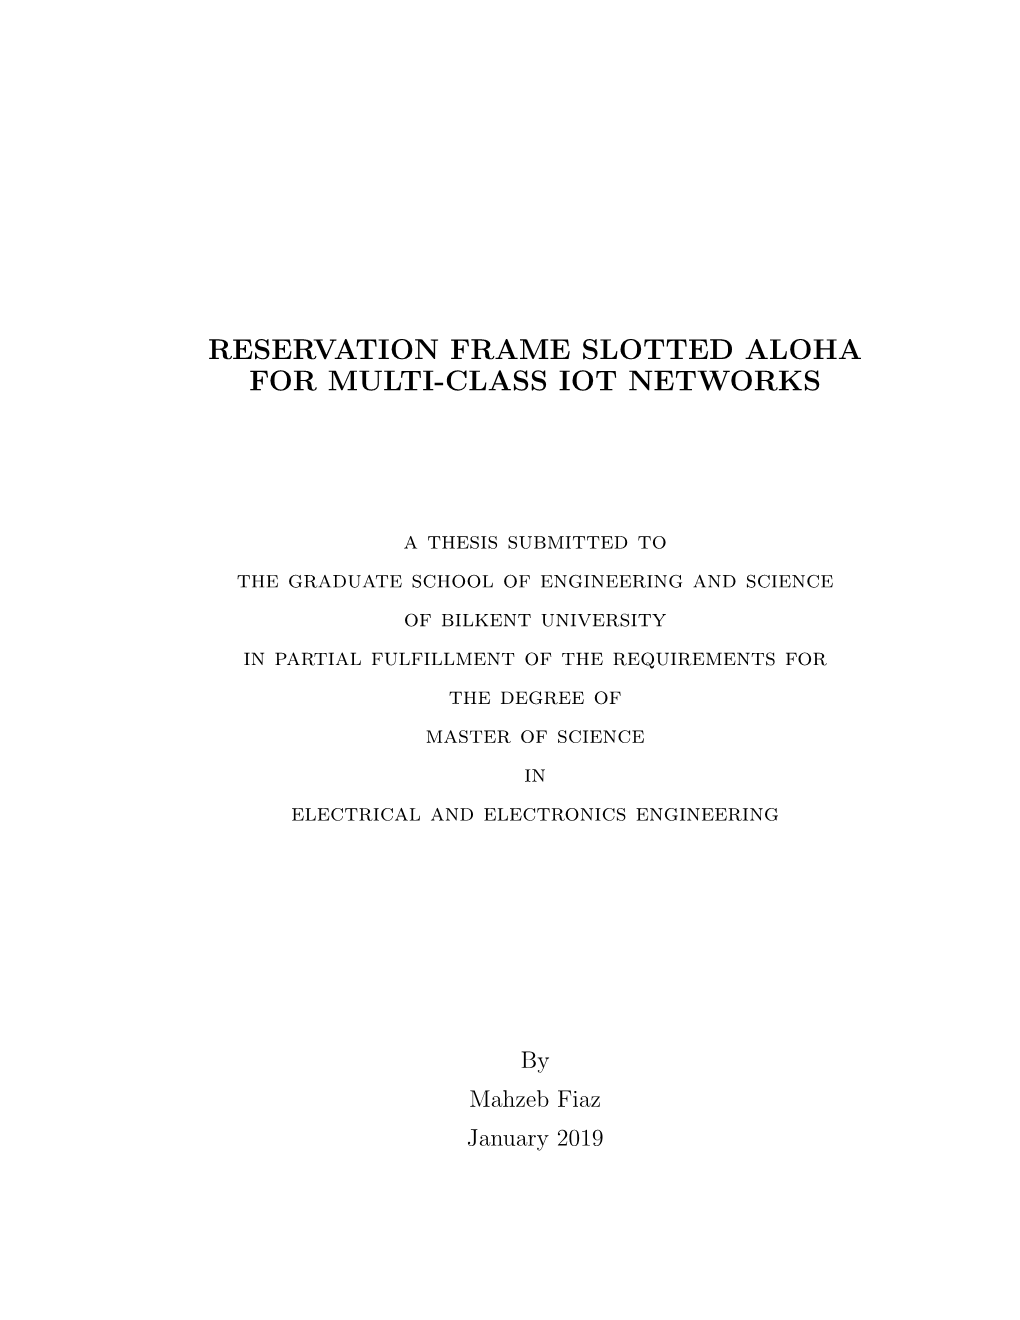 Reservation Frame Slotted Aloha for Multi-Class Iot Networks